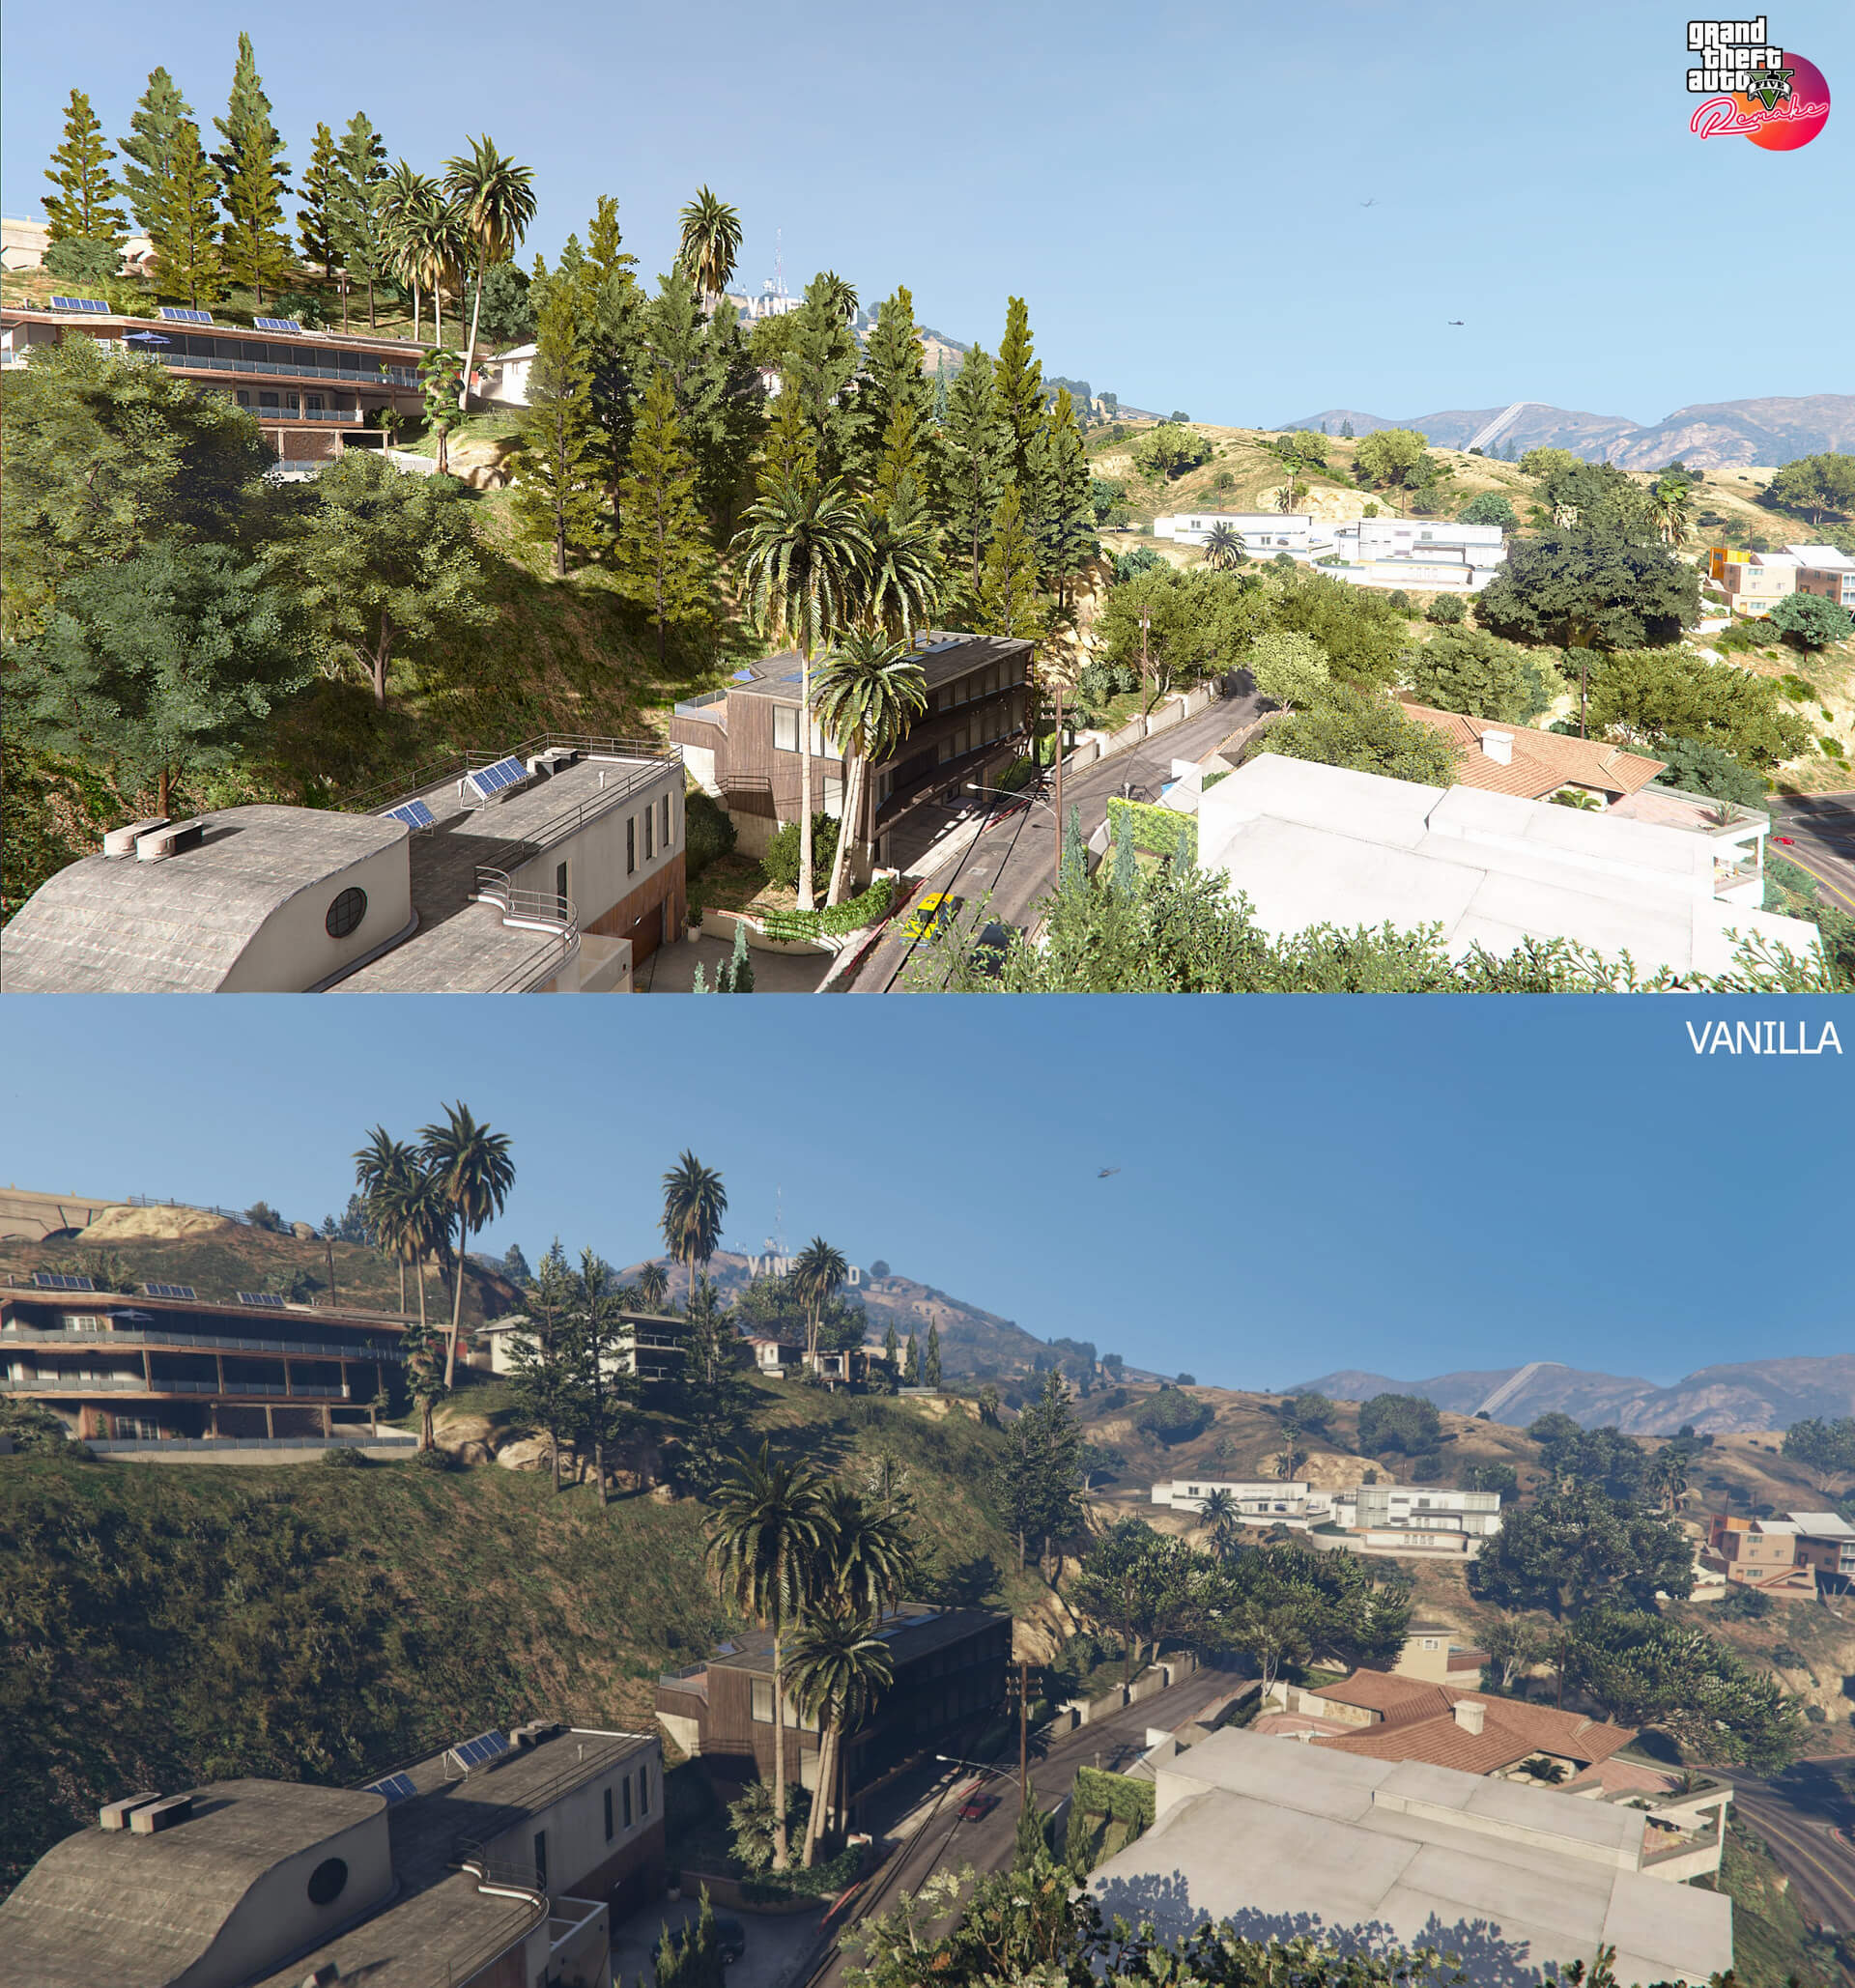 Grand Theft Auto 5 Remake Mod available for download